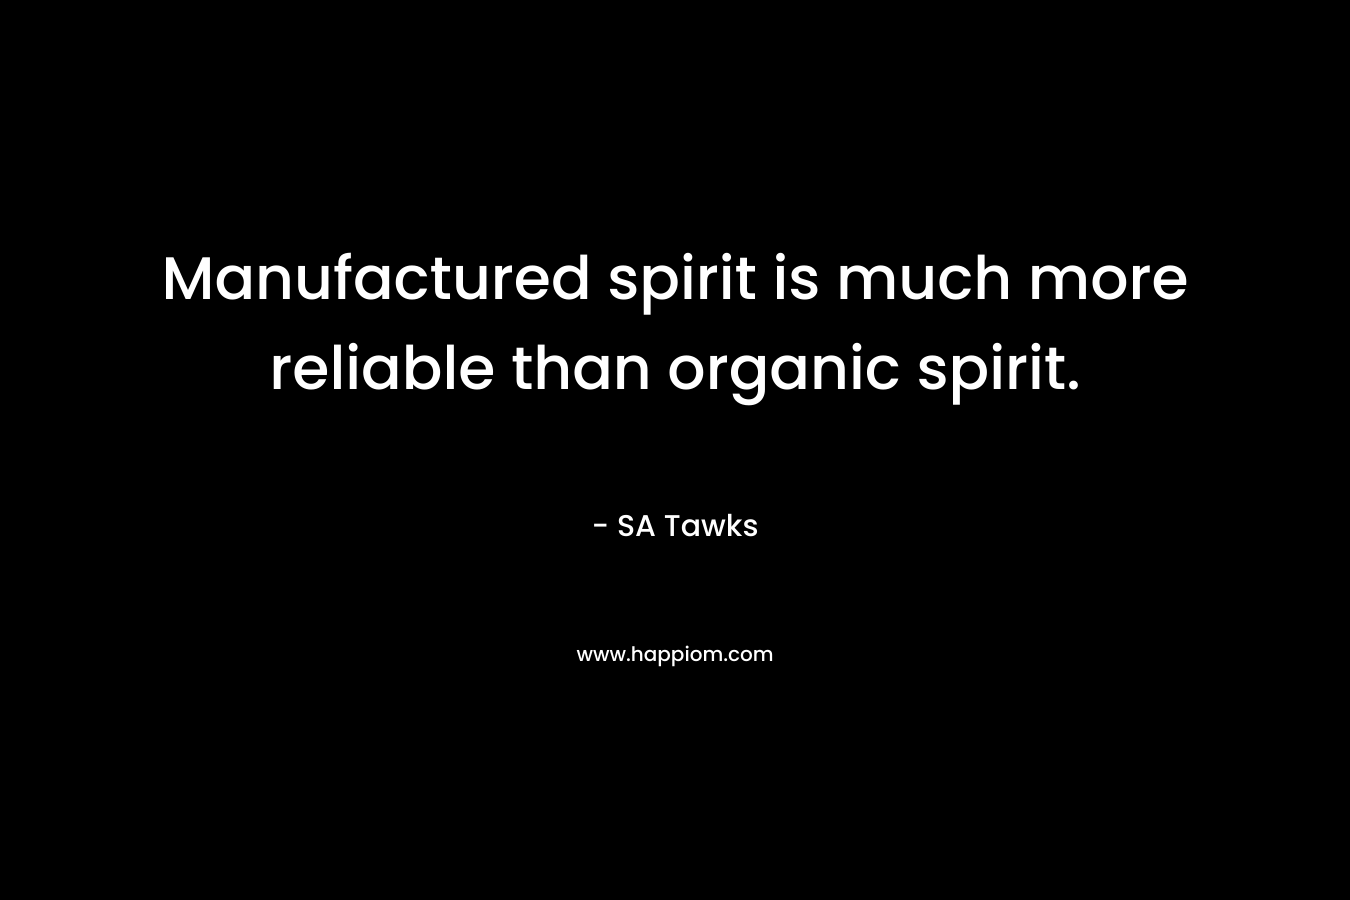 Manufactured spirit is much more reliable than organic spirit. – SA Tawks